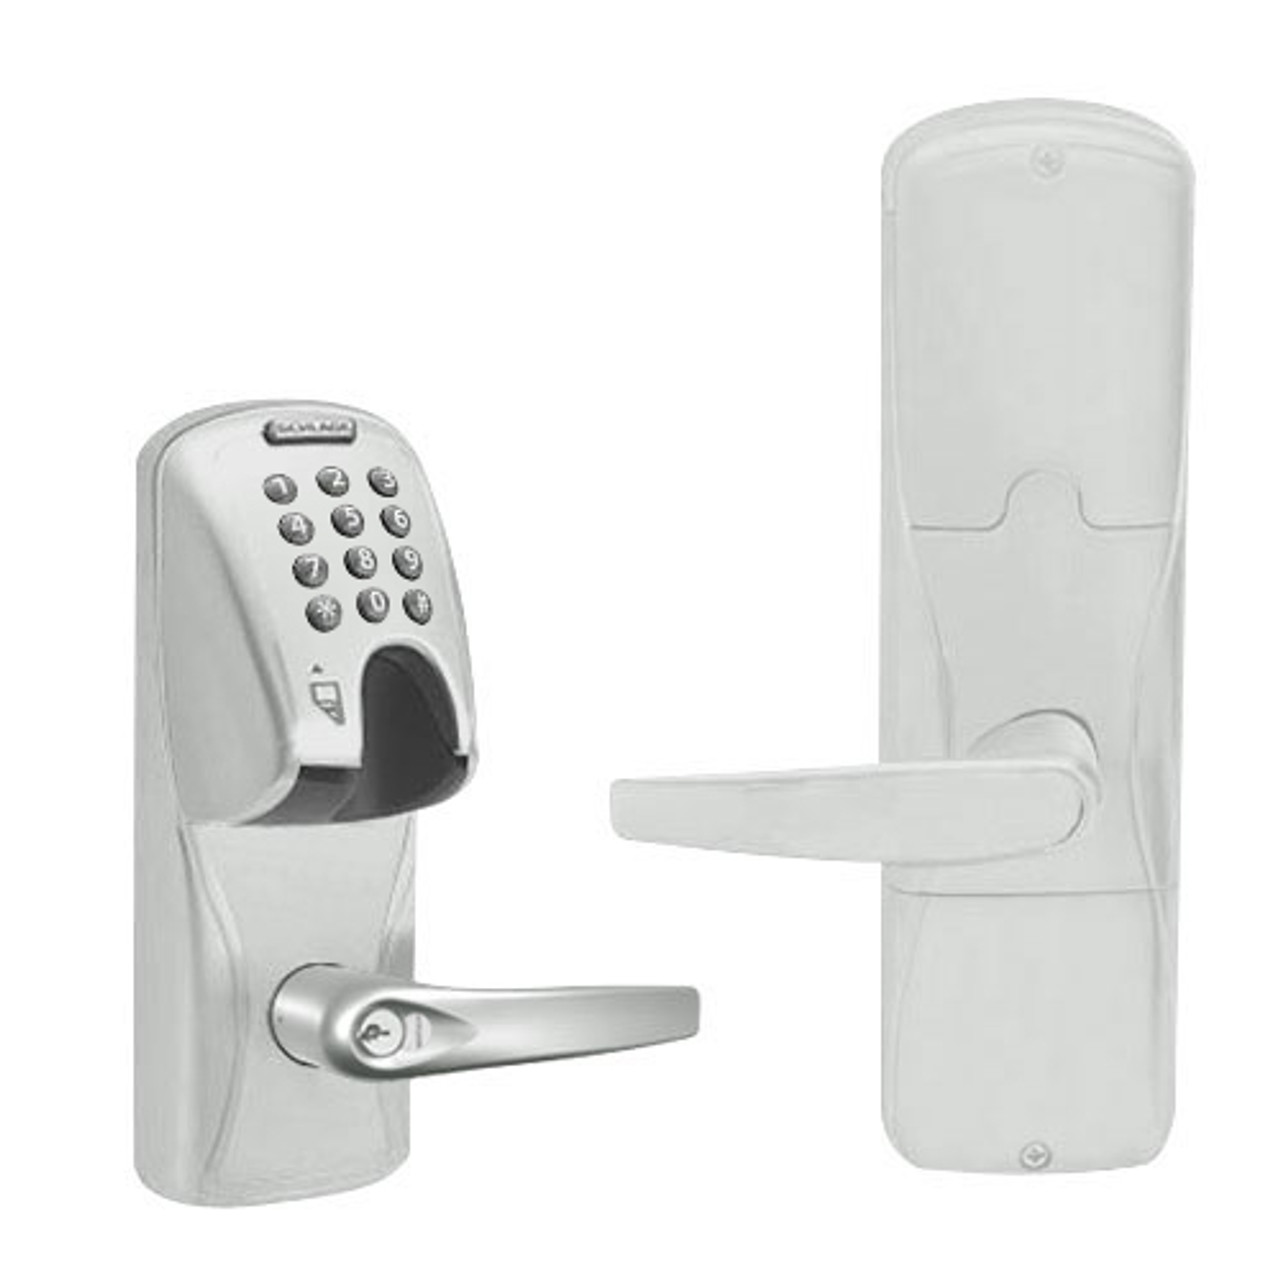 AD200-MS-70-MGK-ATH-RD-619 Schlage Classroom/Storeroom Mortise Magnetic Stripe(Insert) Keypad Lock with Athens Lever in Satin Nickel